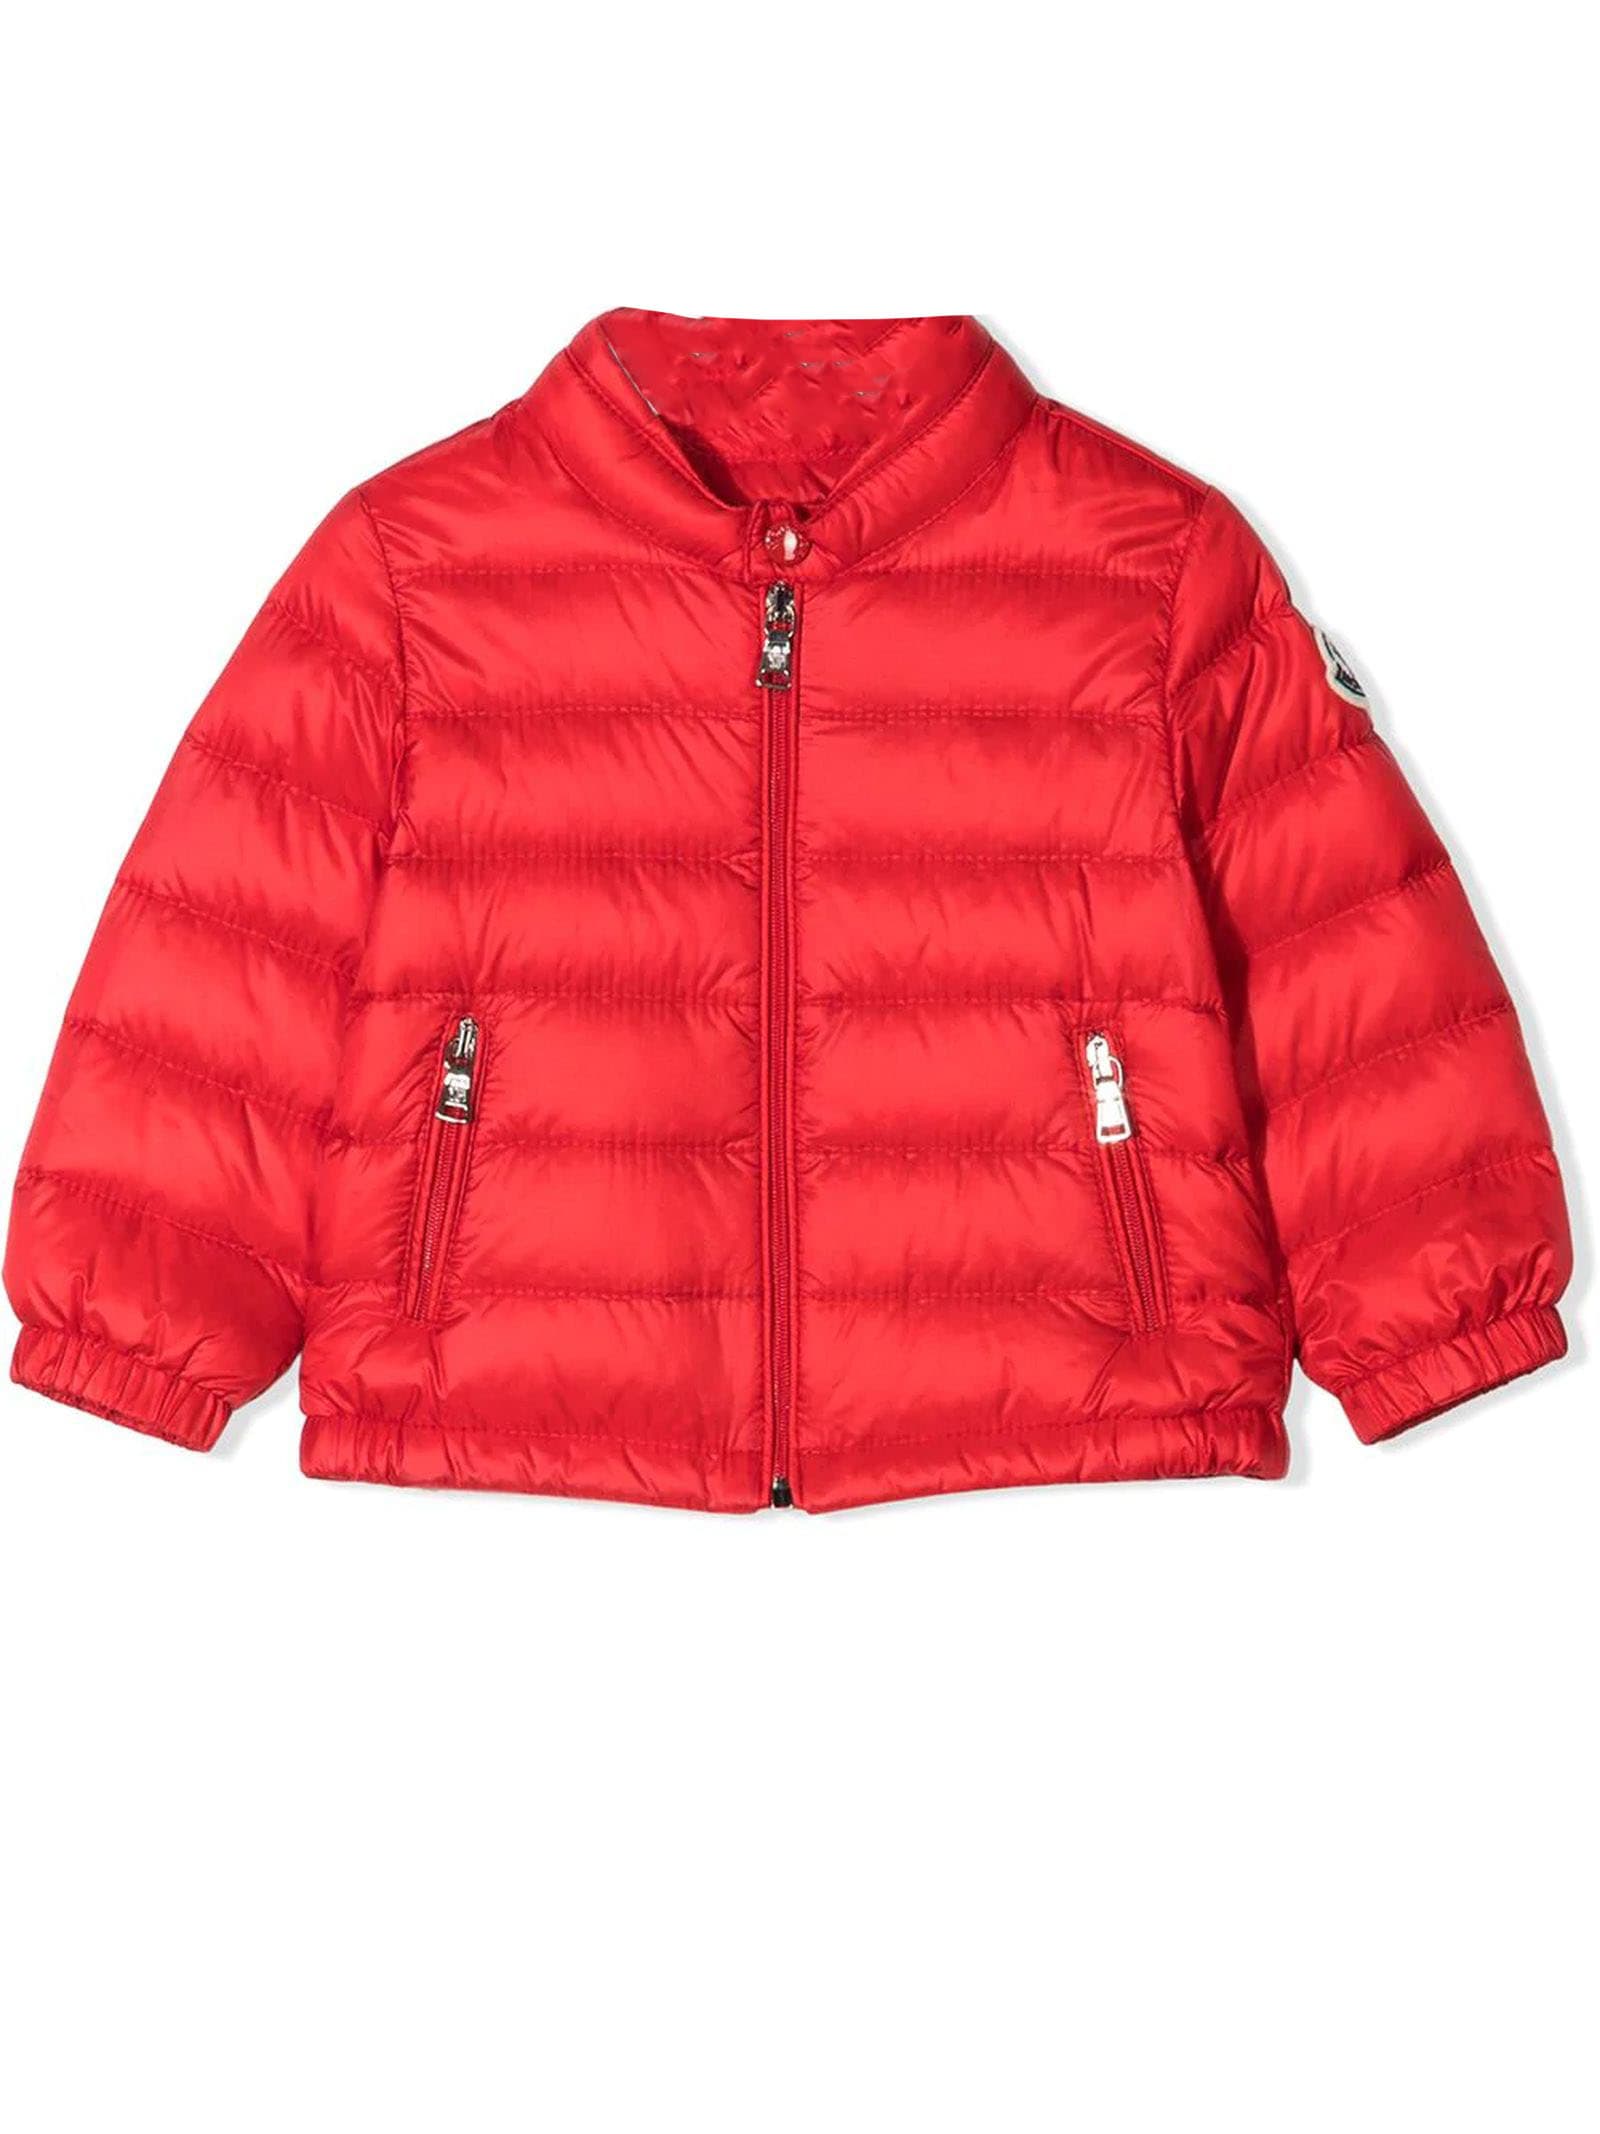 Moncler Red Puffer Jacket